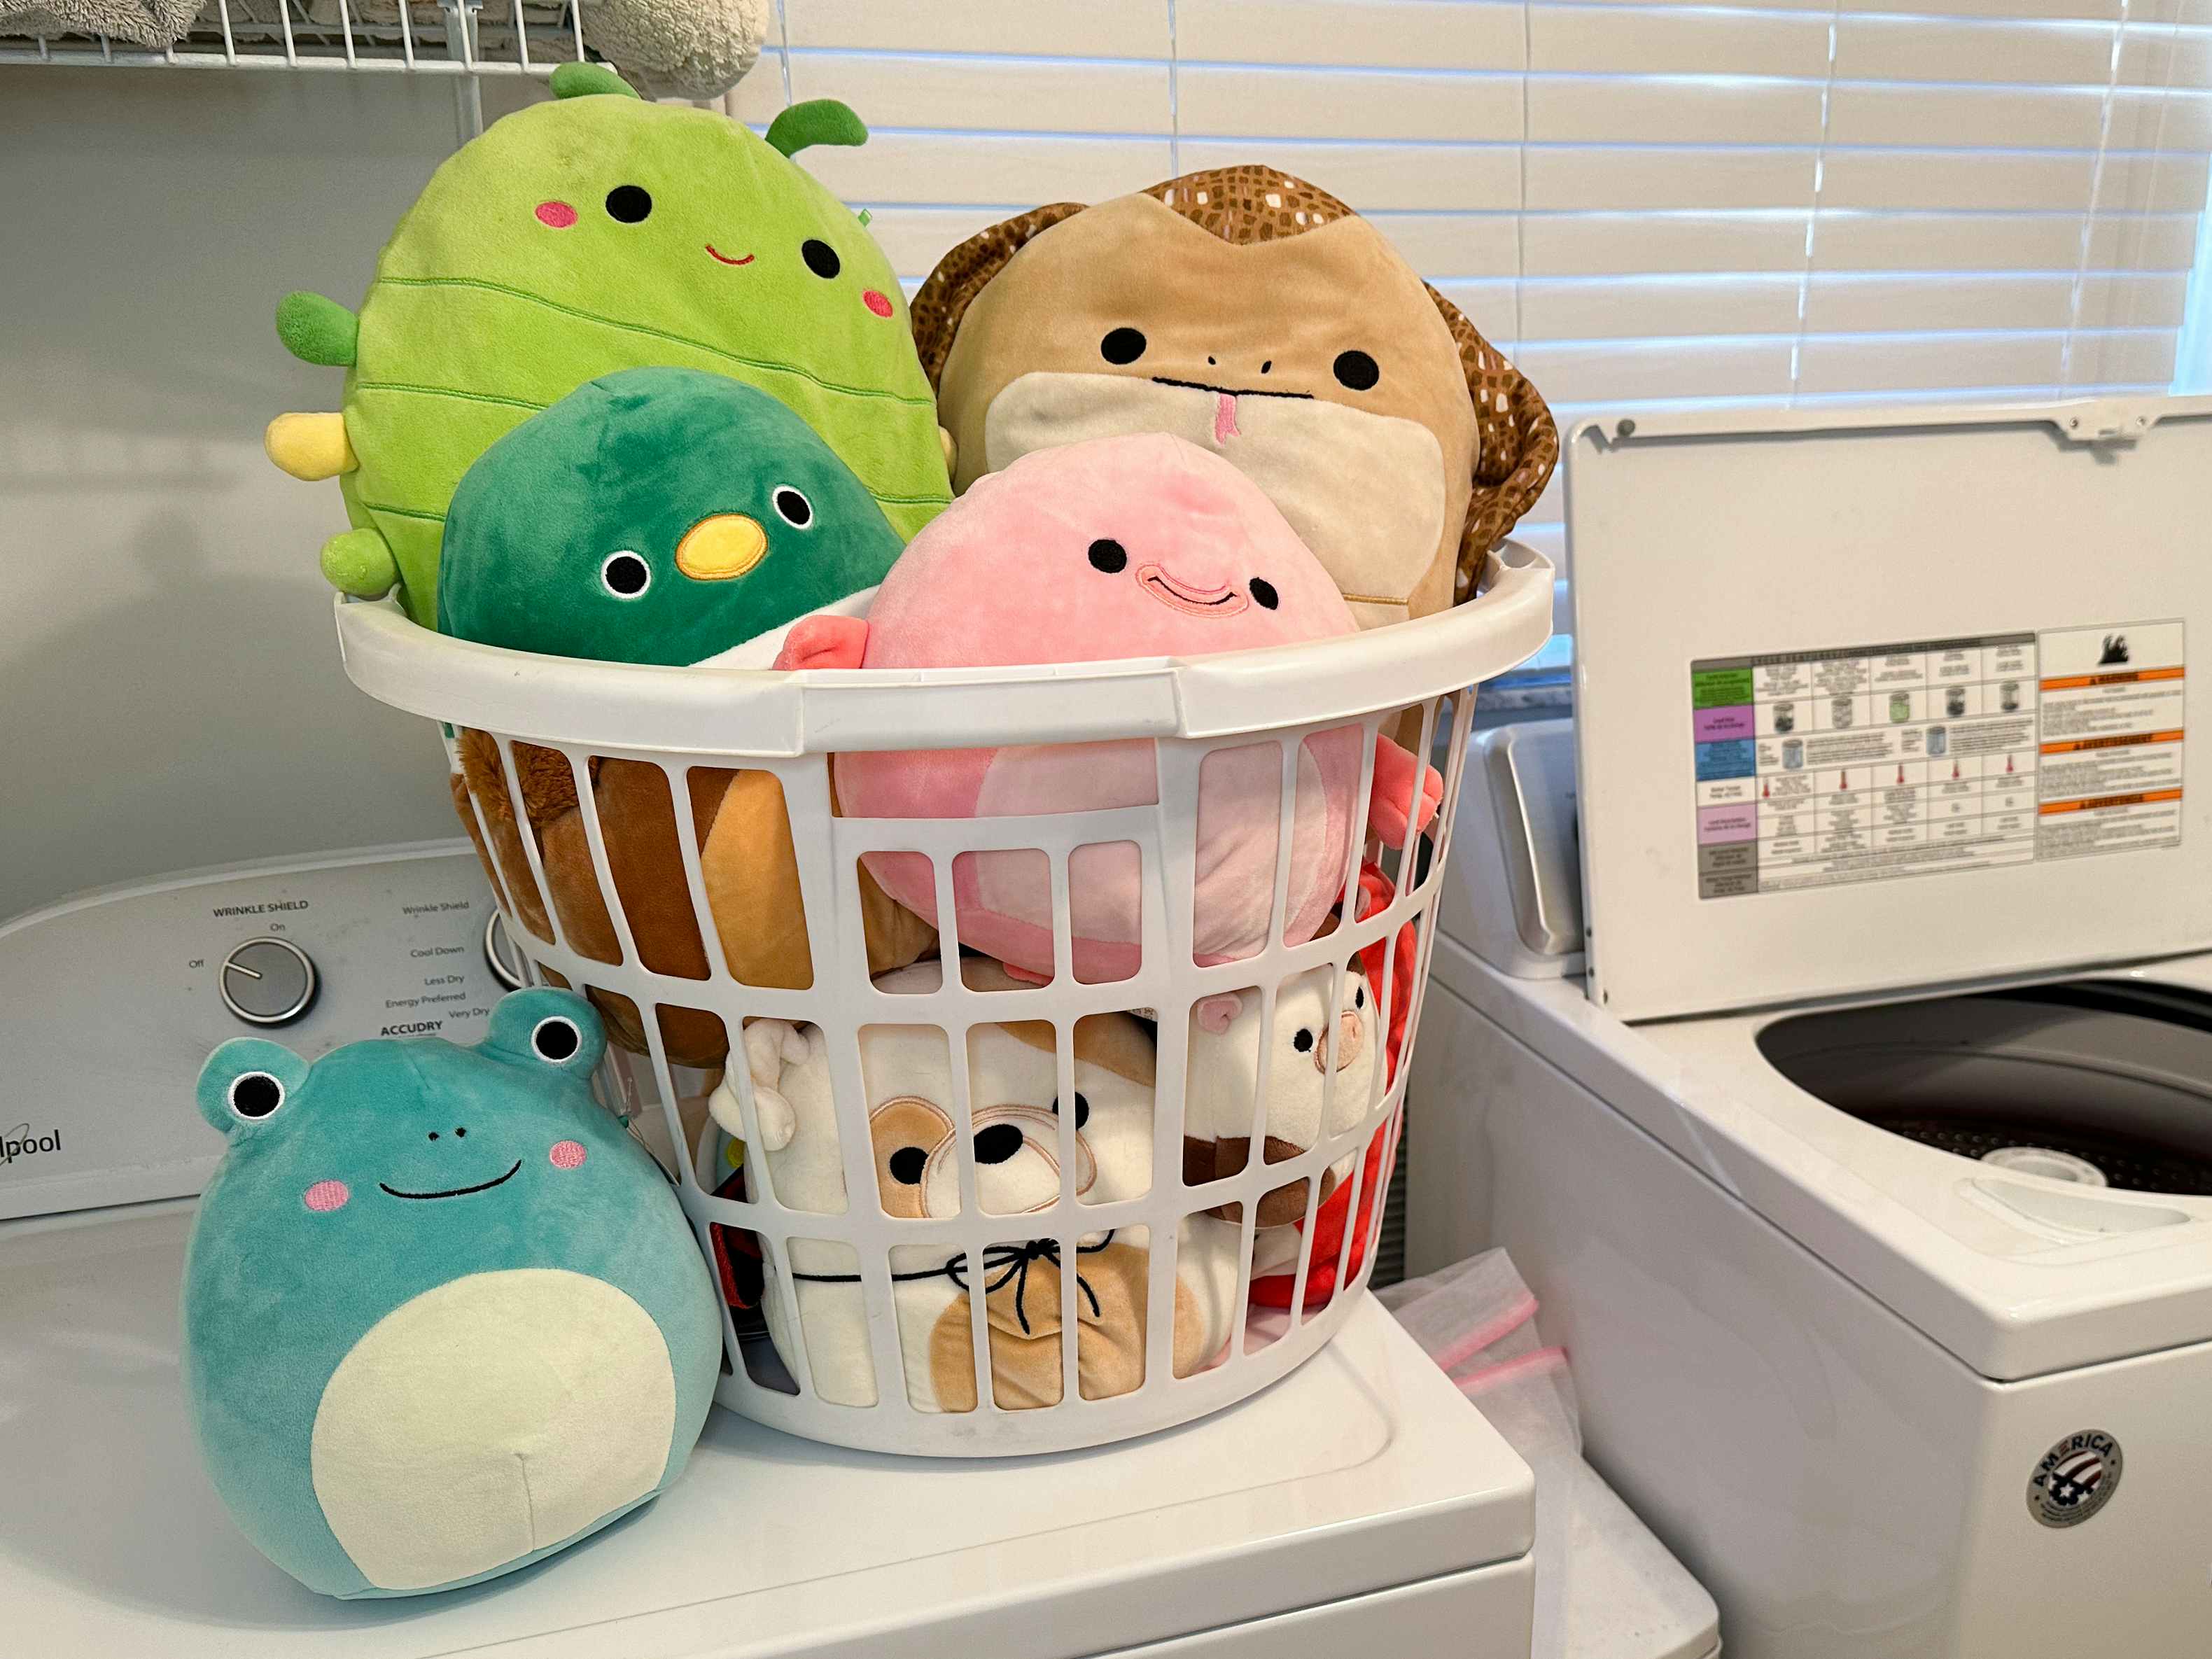 A laundry basket of Squishmallows waiting to be washed